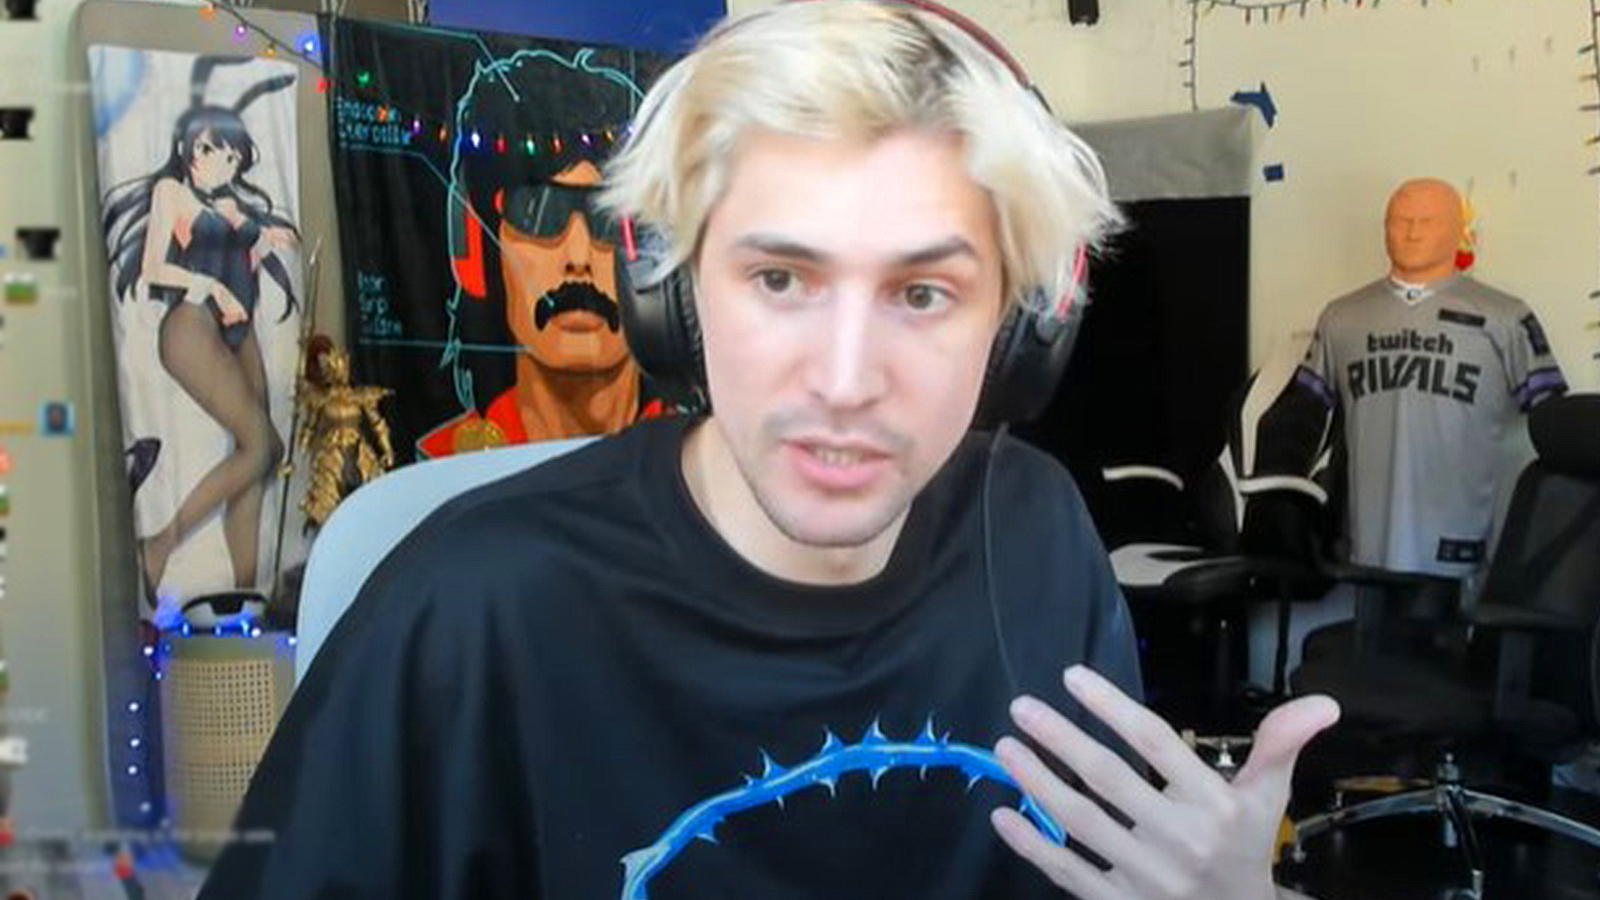 xQc has just signed a non exclusive deal with Kick that sees The Juicer bringing home over 70 million dollars alongside his Twitch streams.